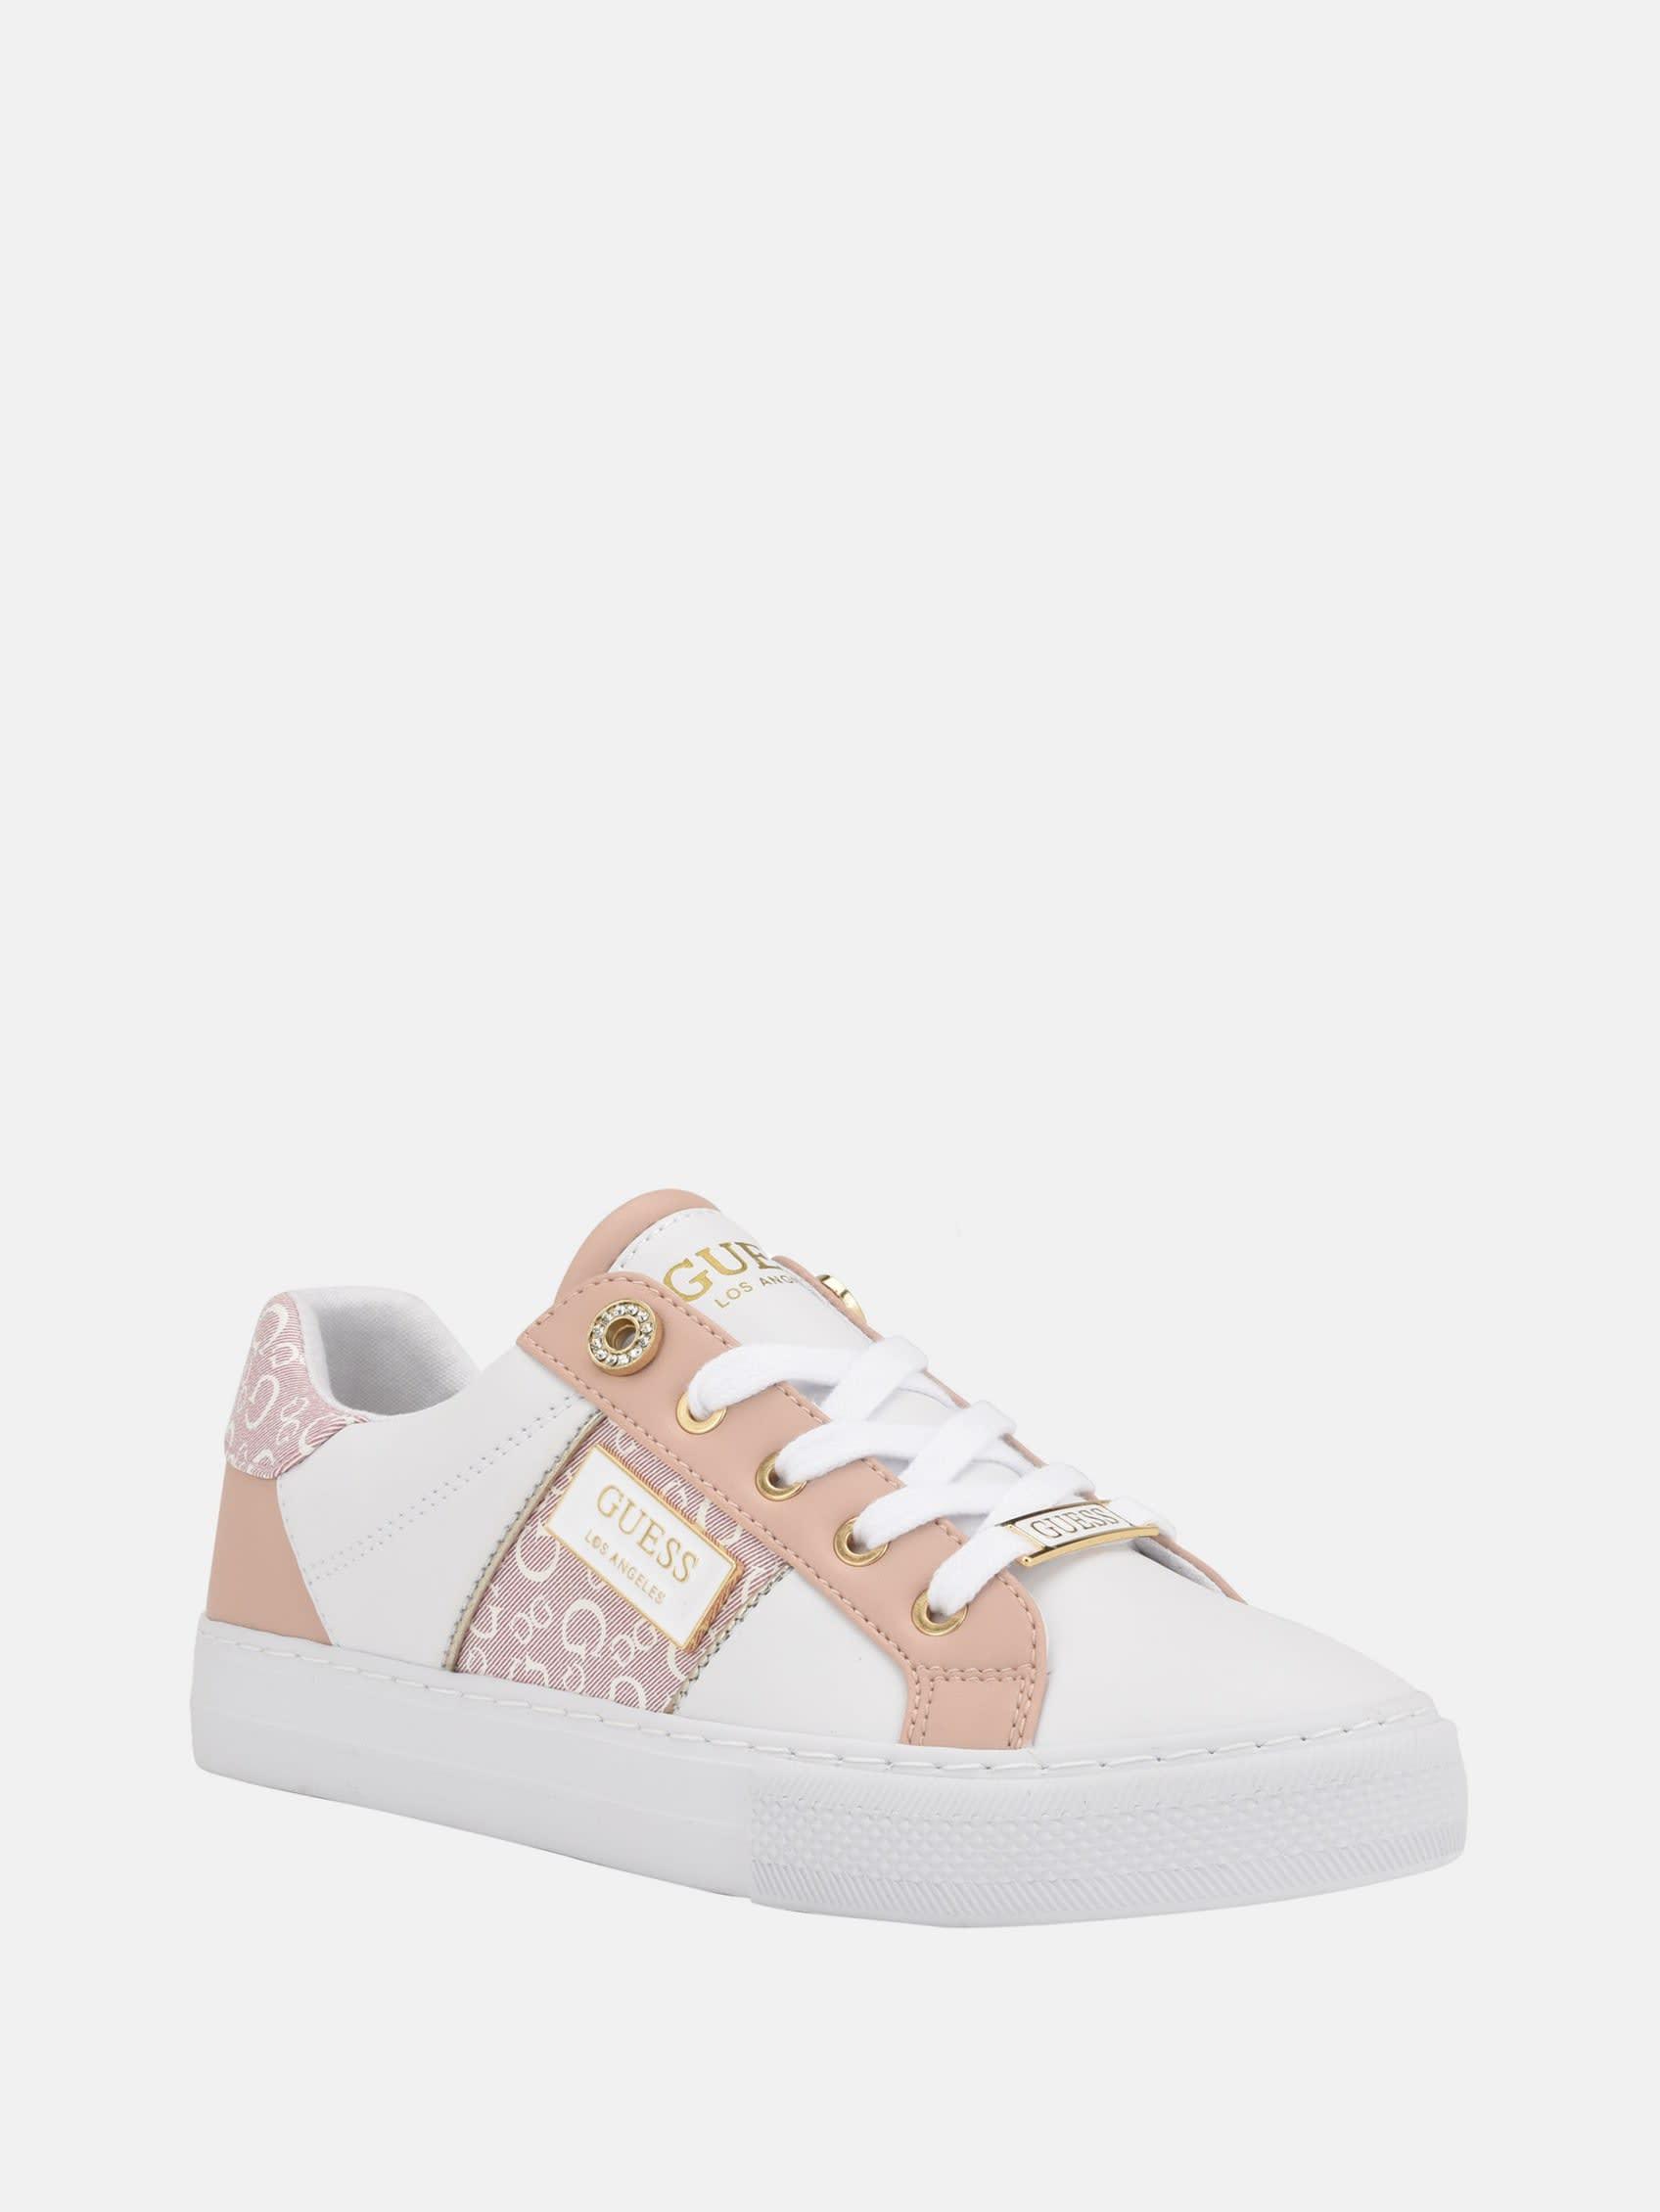 Guess Factory Loom Low-top Sneakers in White | Lyst